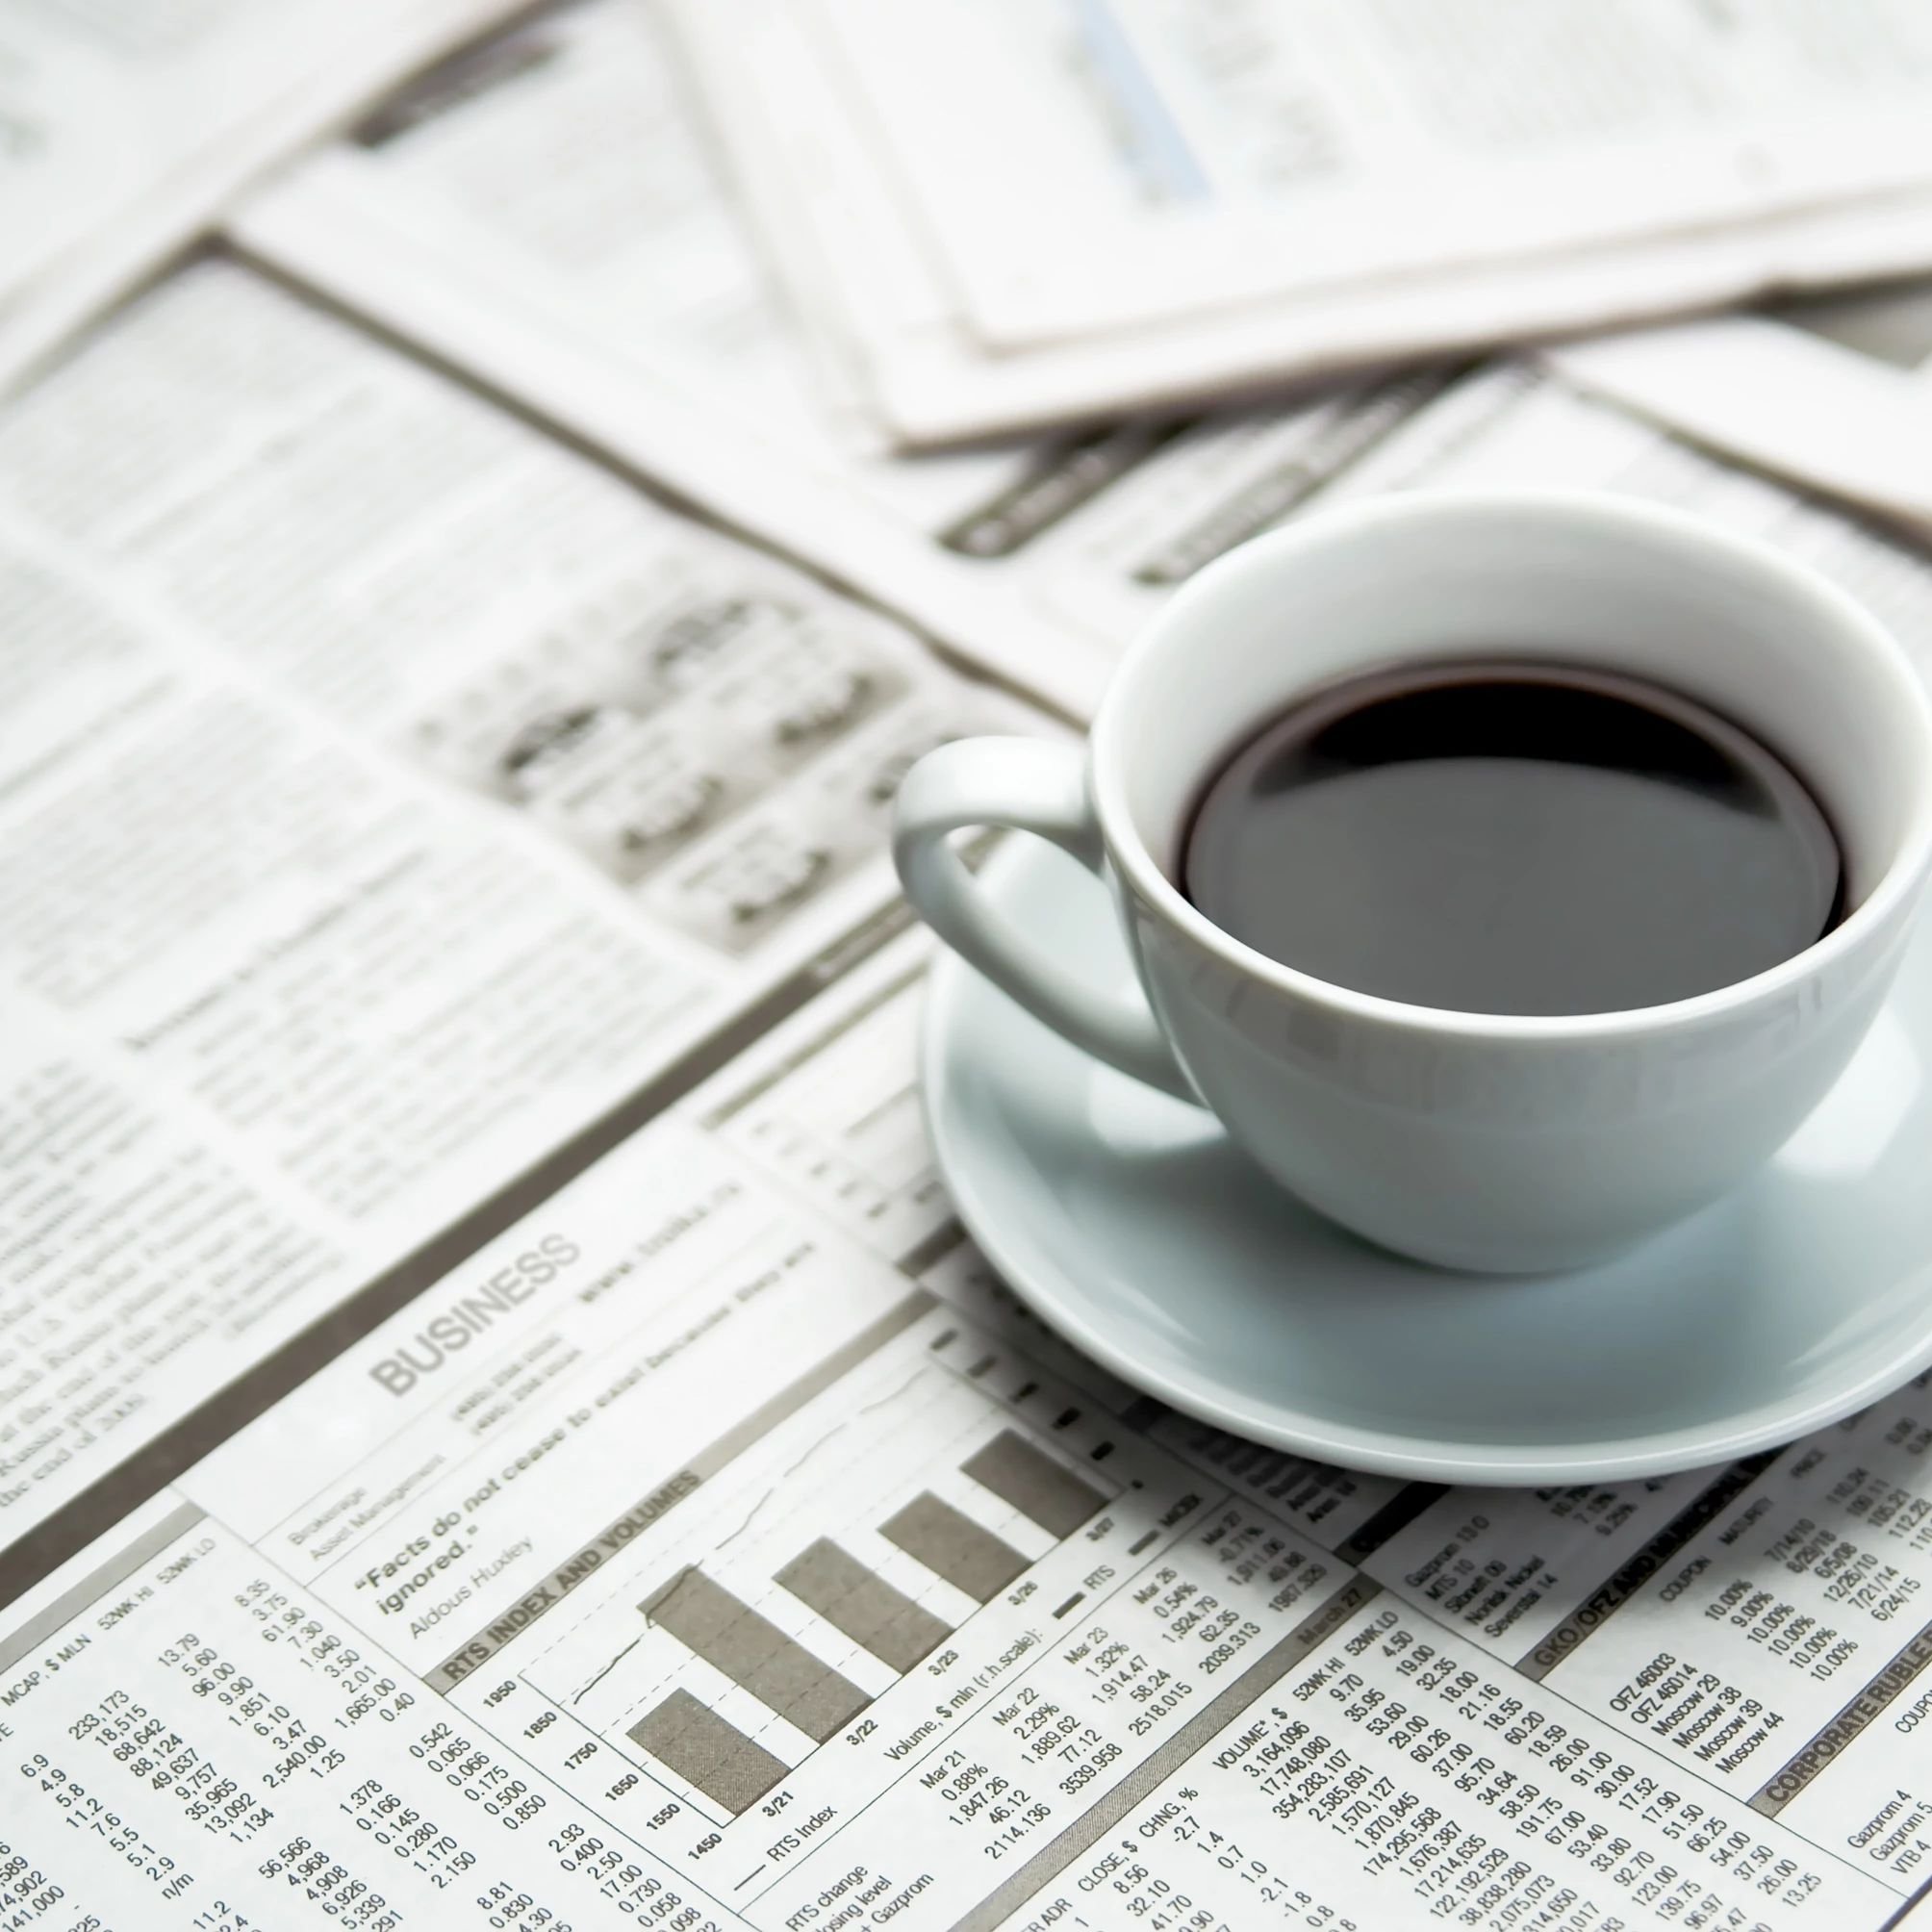 A cup of coffee on the newspaper in Huntington Beach, CA